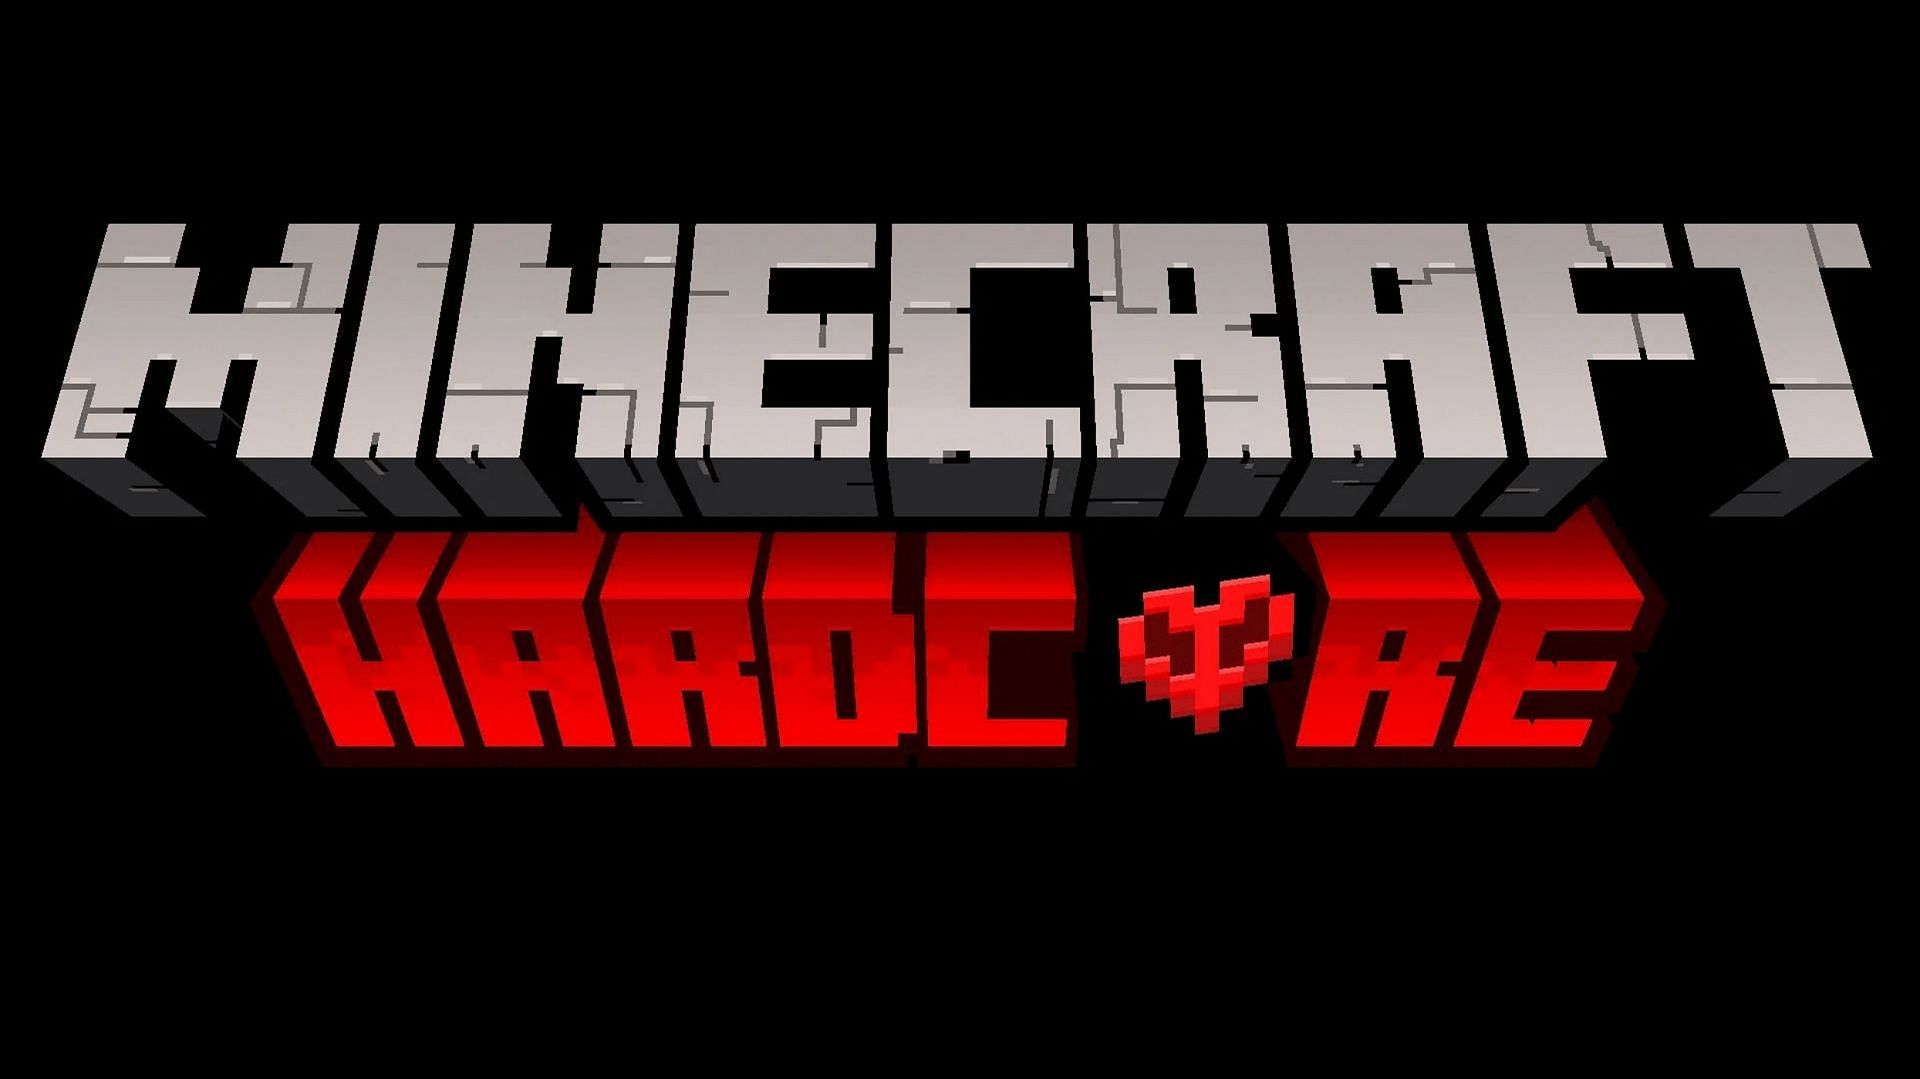 Hardcore Mode will make players work hard to get and keep all they have (Image via Mojang)